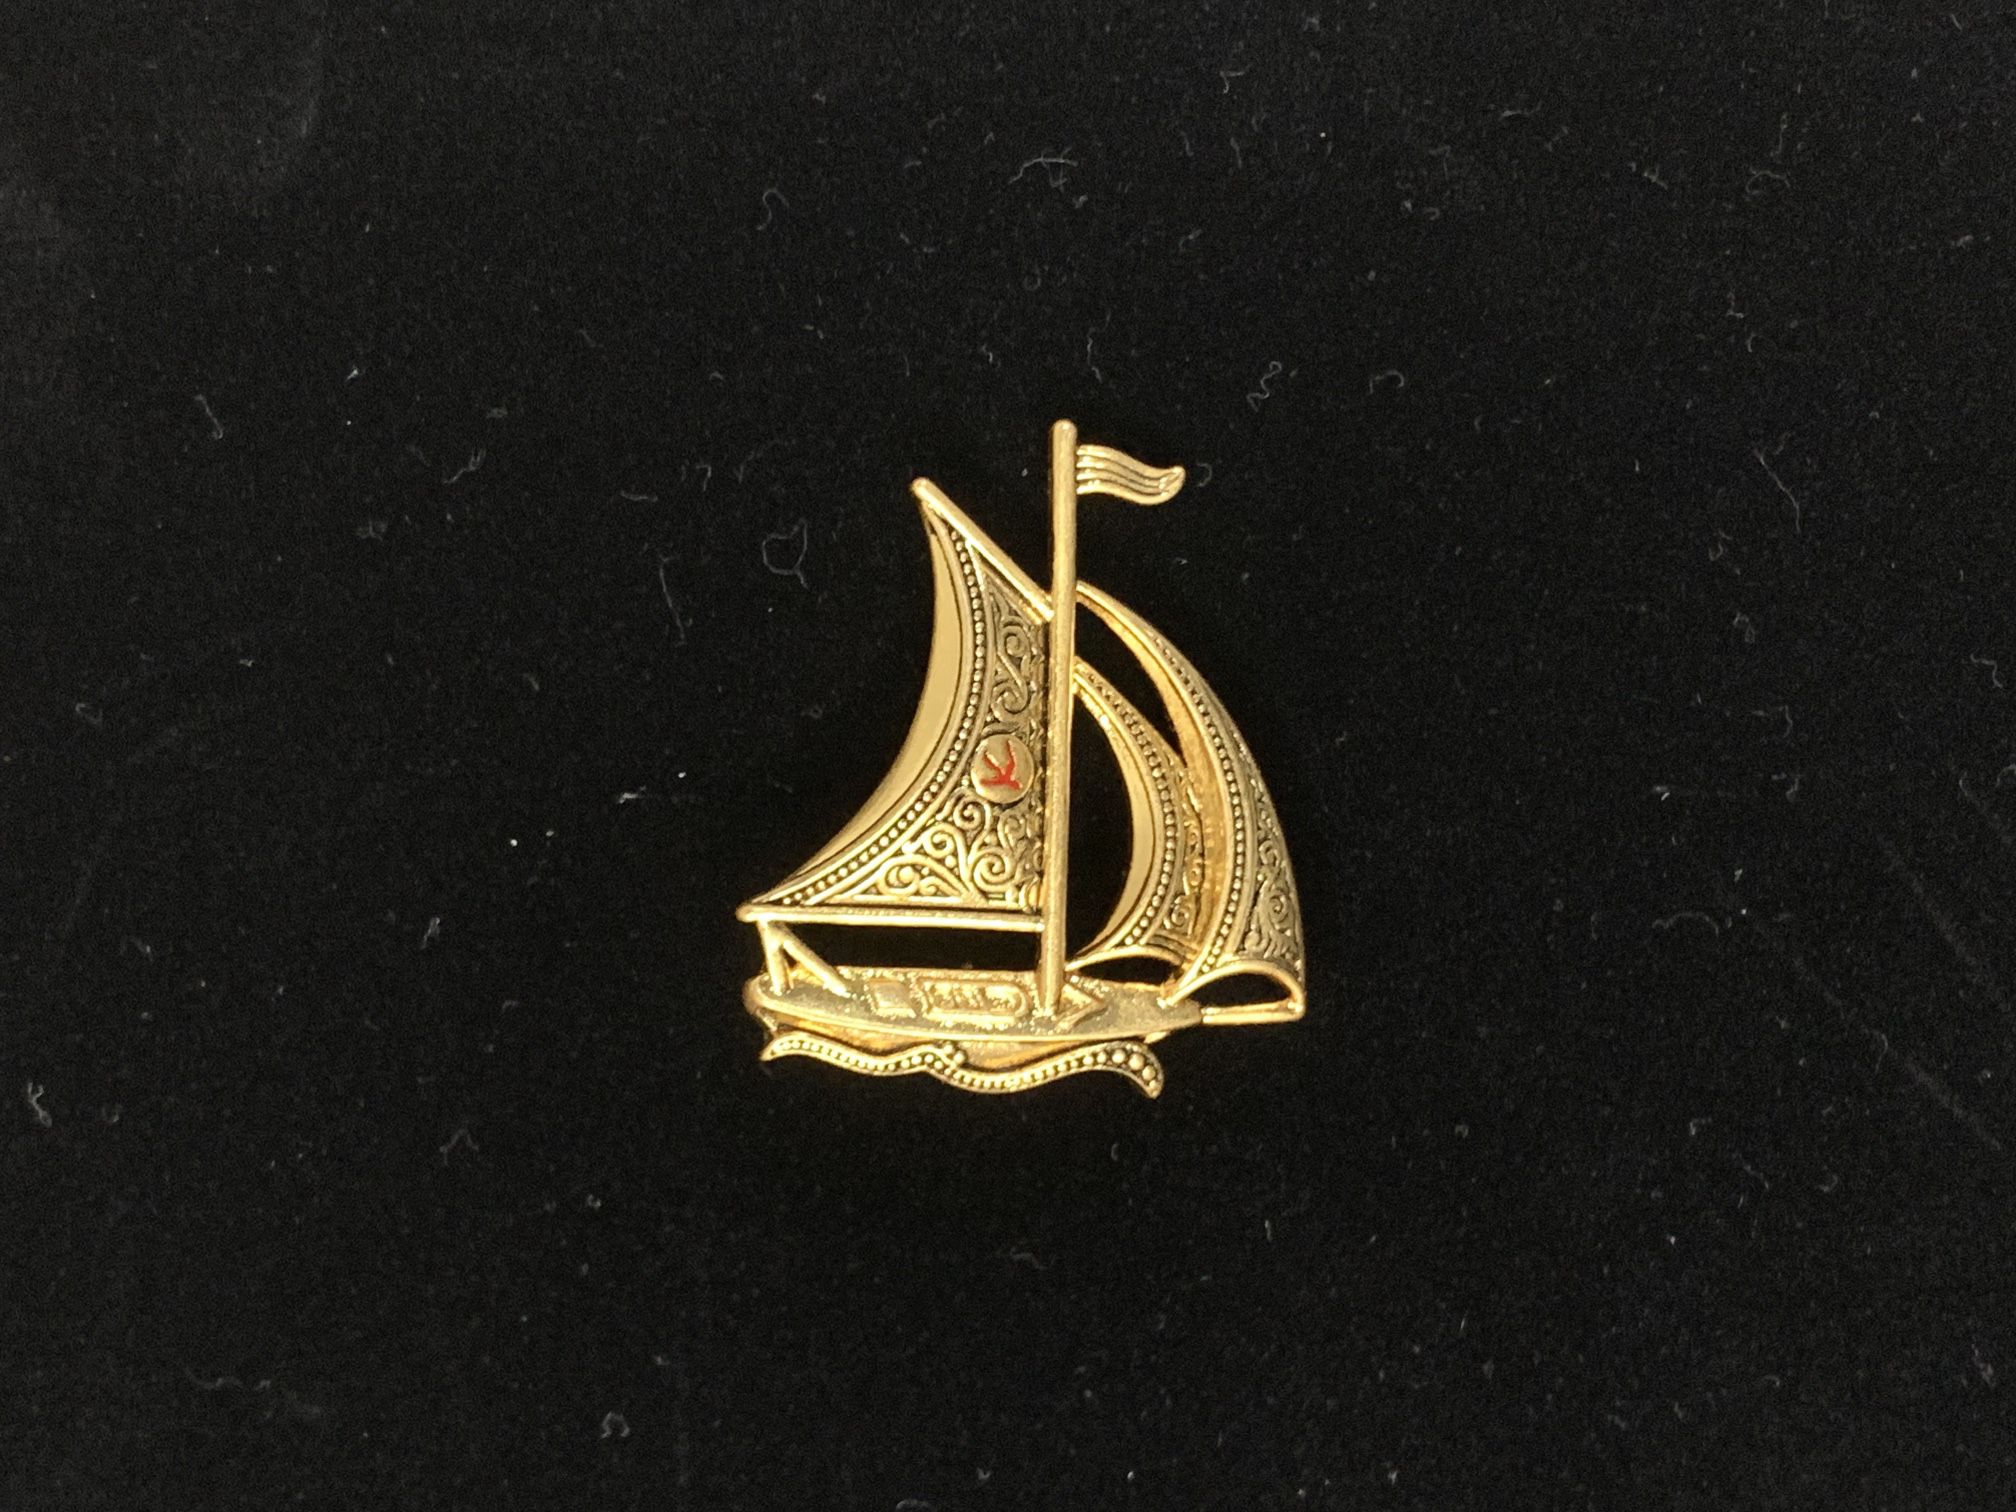 Gold Plated Tones Spanish Ship Brooch, Pin, Stamped Spain., Jewelry, Vintage